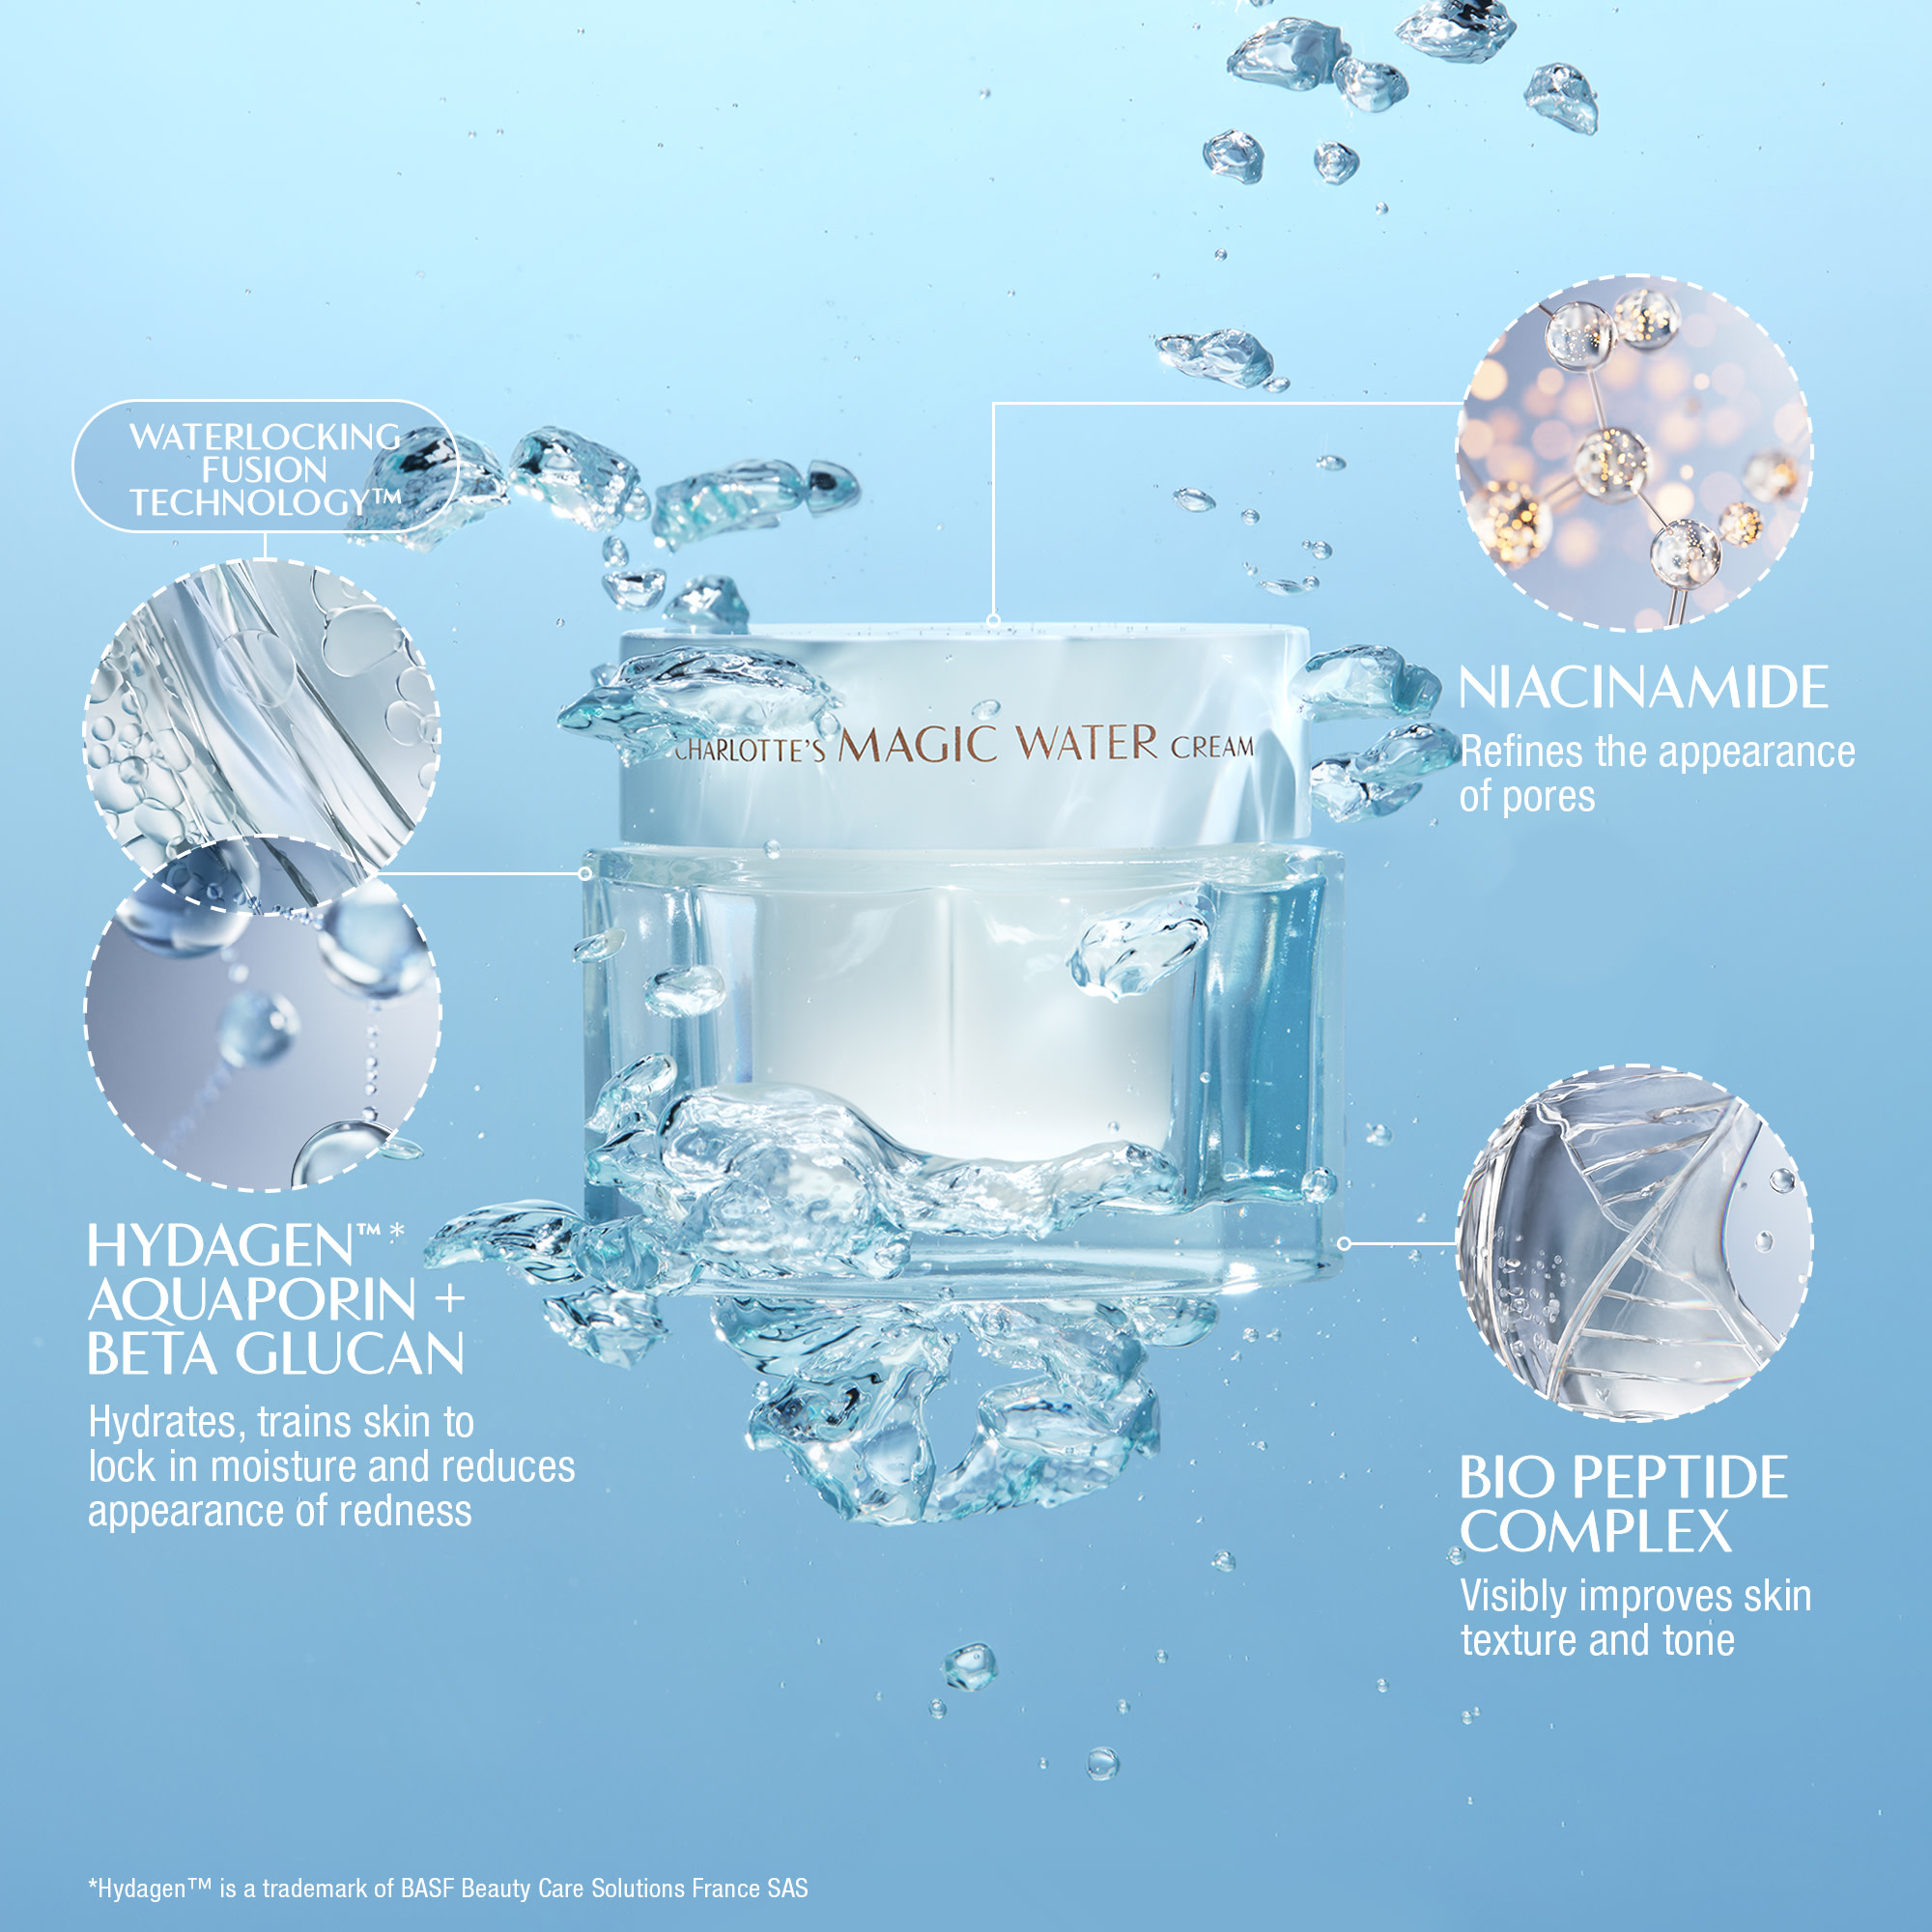 Infographic explaining the key ingredients in Charlotte's Magic Water Cream including Aquaporin